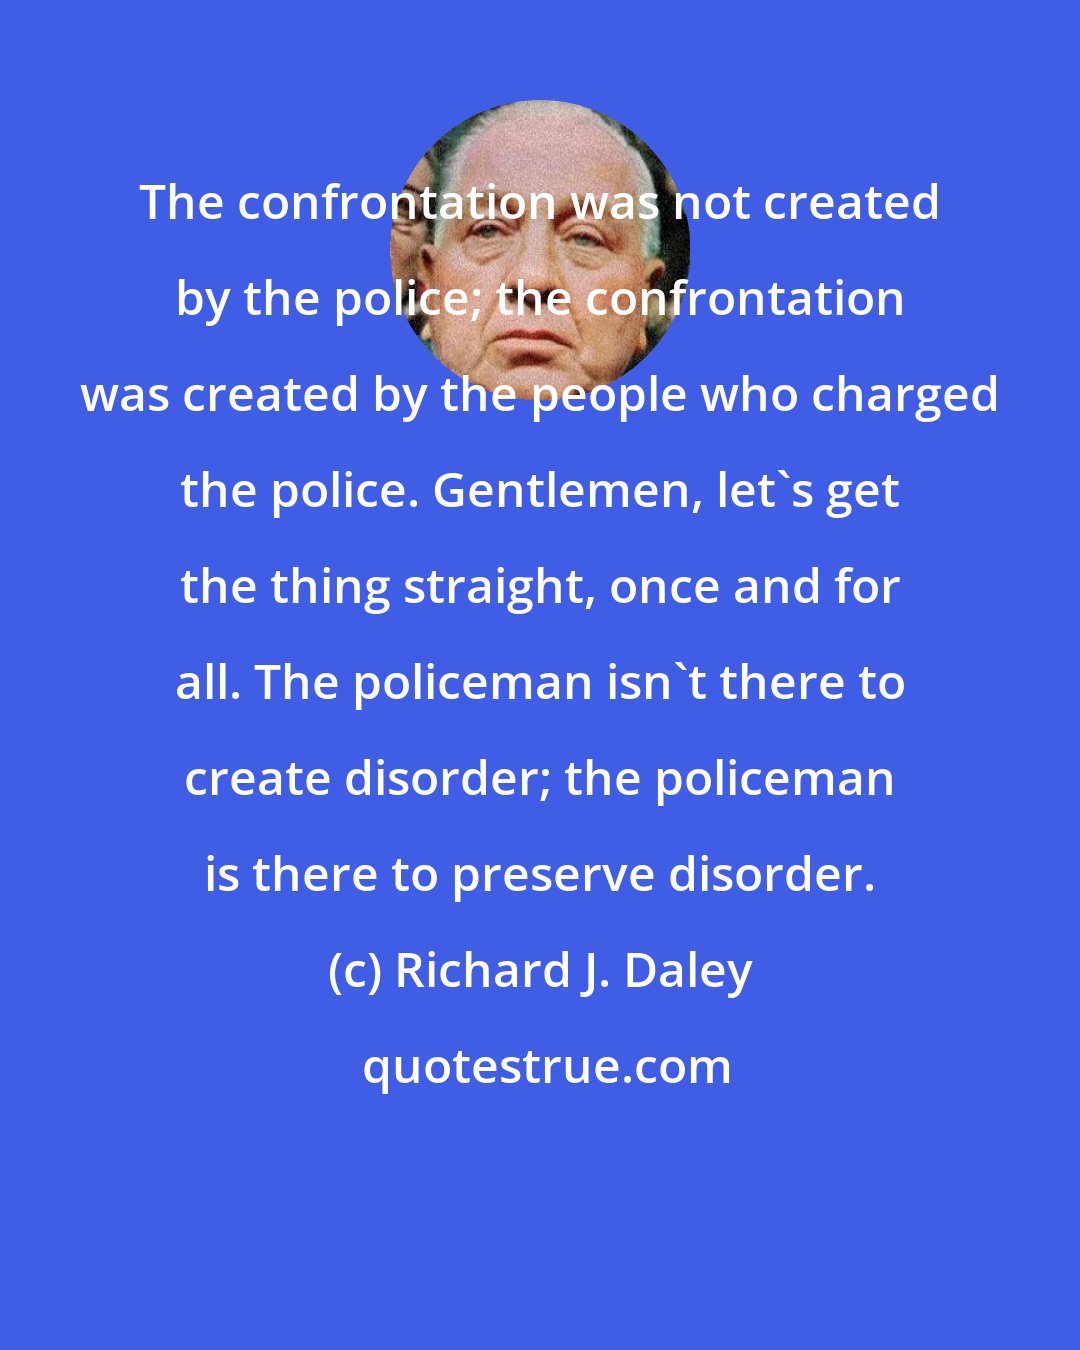 Richard J. Daley: The confrontation was not created by the police; the confrontation was created by the people who charged the police. Gentlemen, let's get the thing straight, once and for all. The policeman isn't there to create disorder; the policeman is there to preserve disorder.